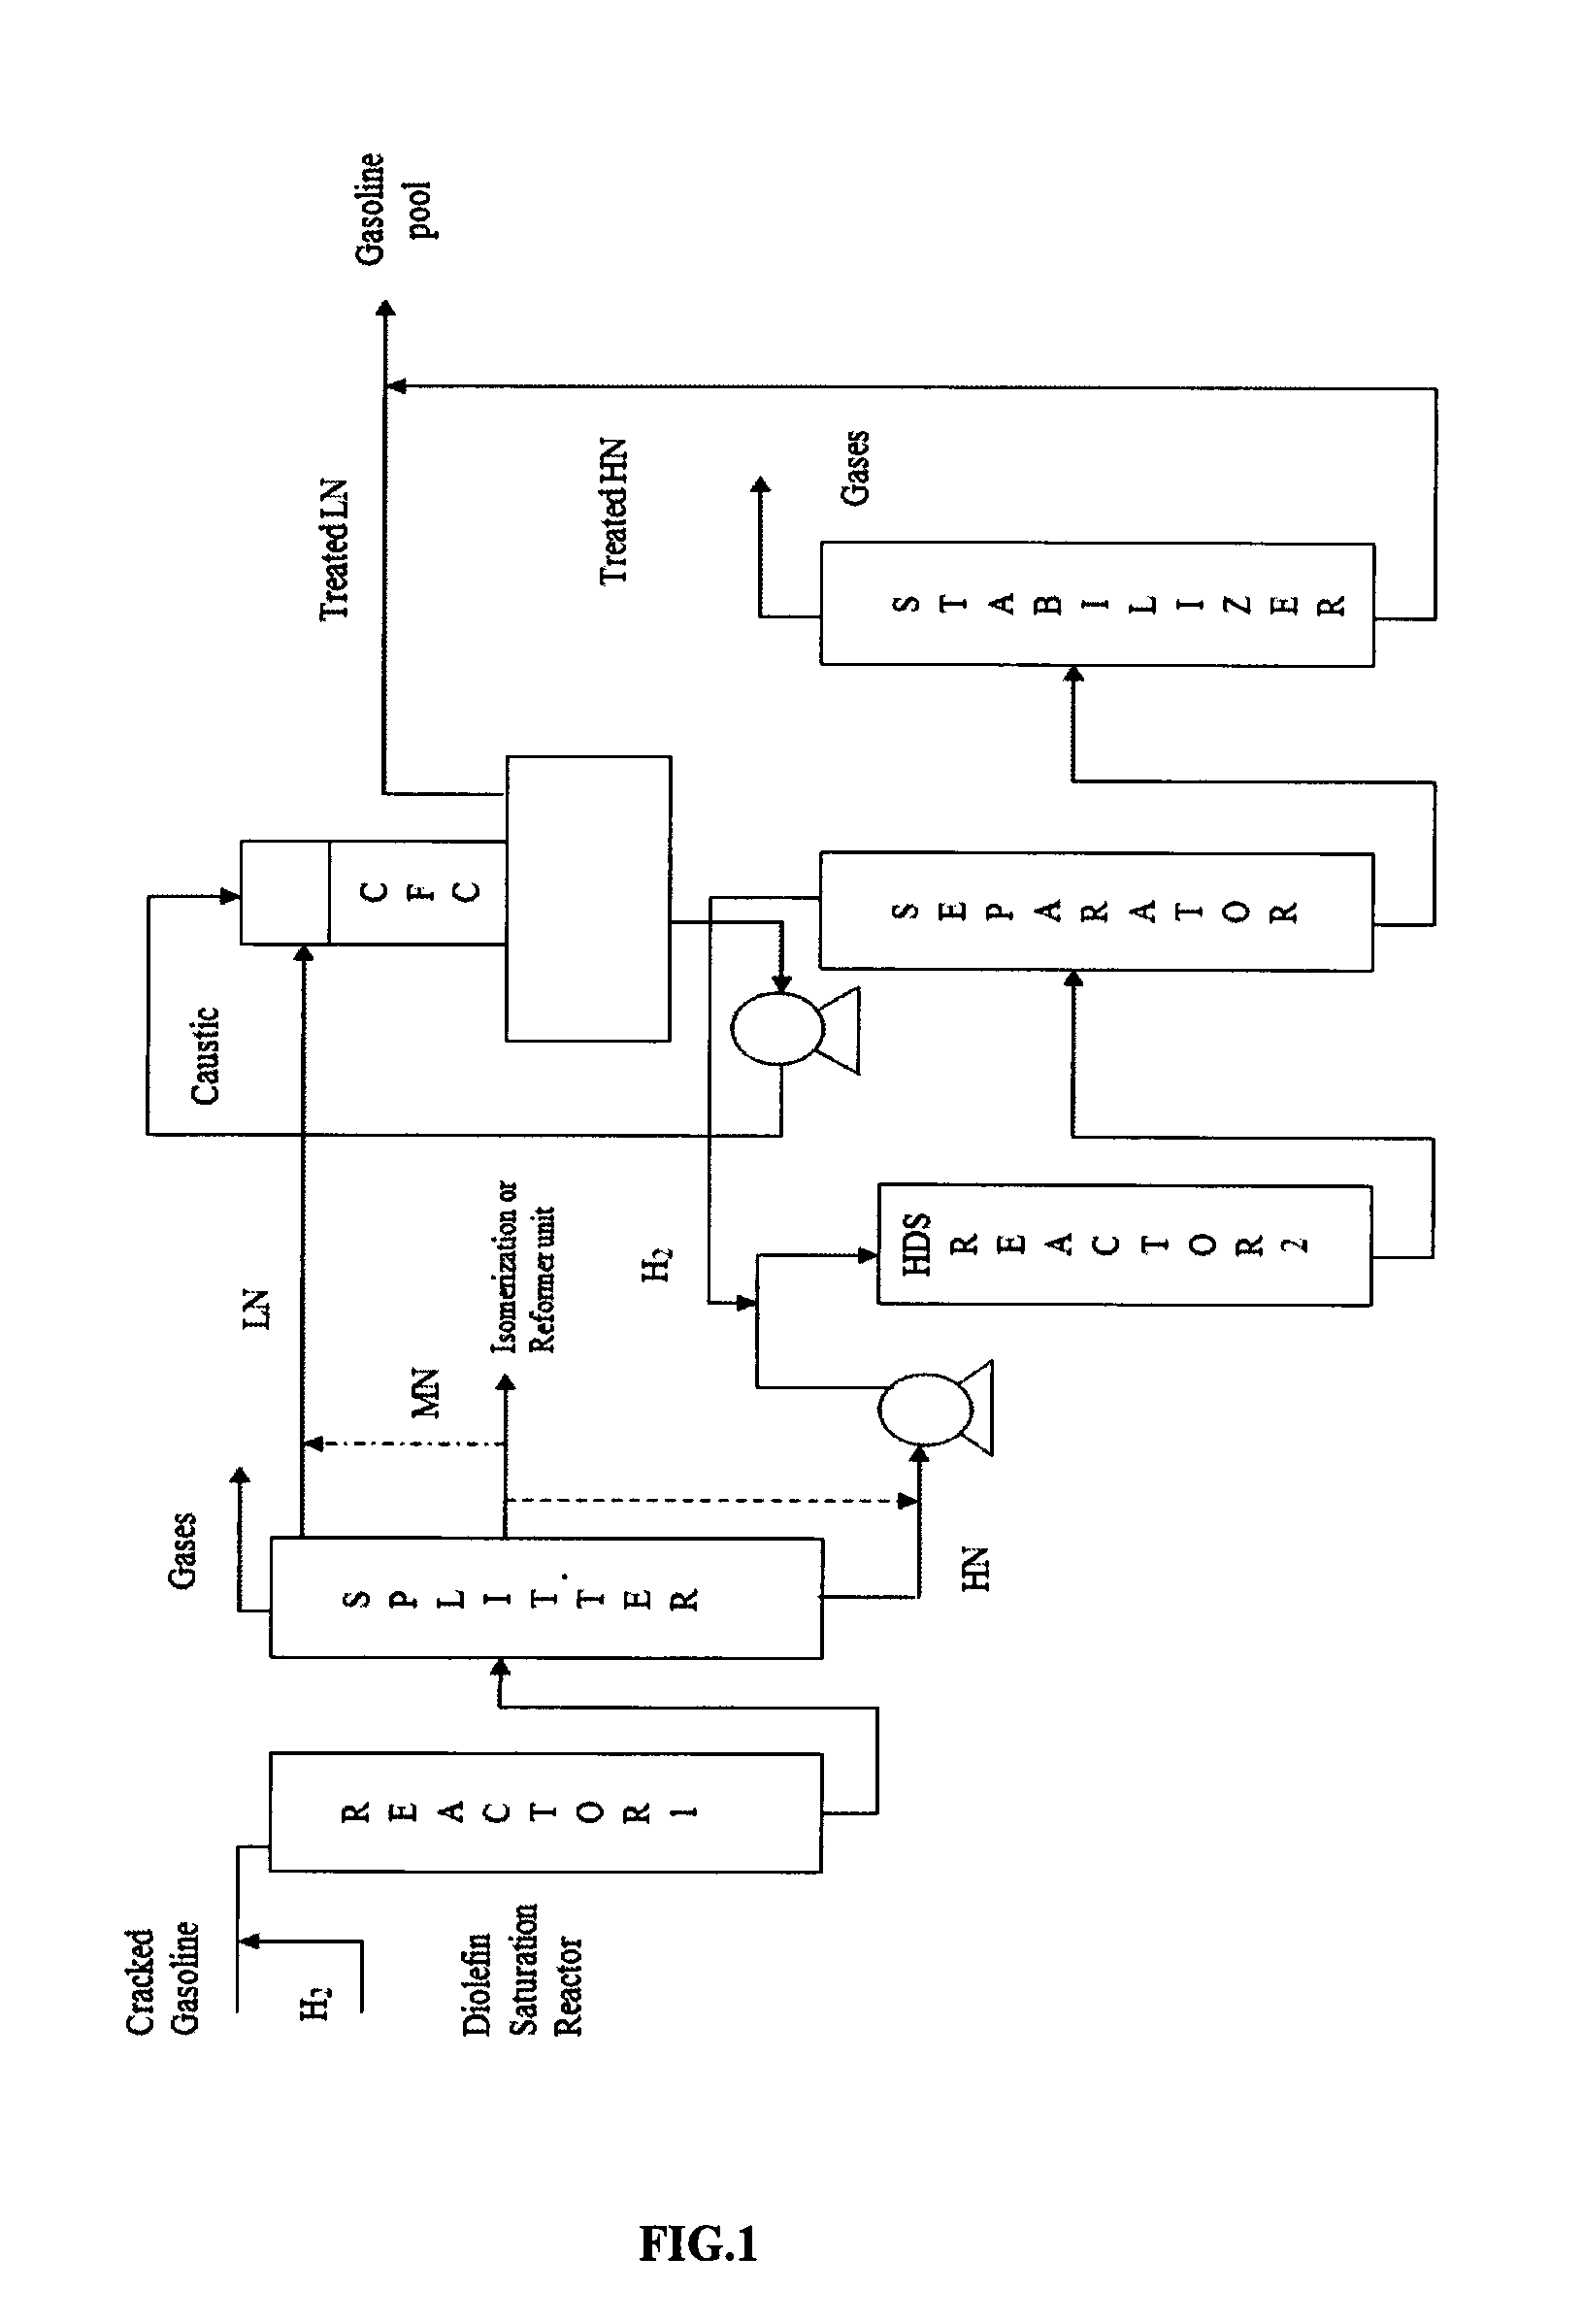 Process for deep desulfurization of cracked gasoline with minimum octane loss